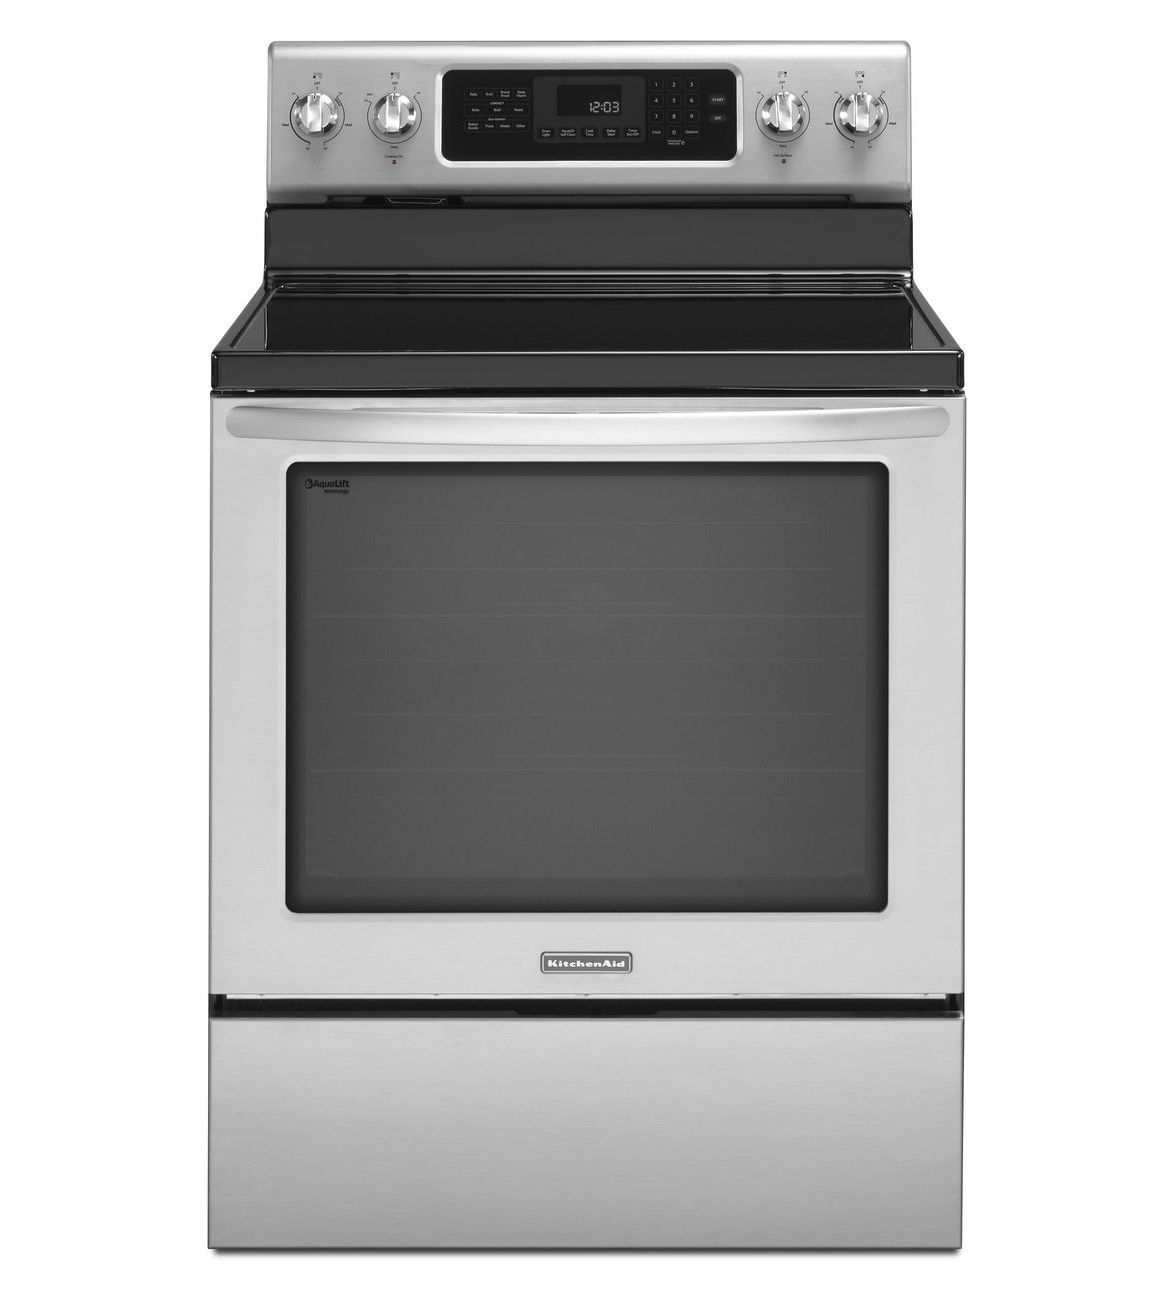 Kitchenaid KERS202BSS 30" Freestanding Electric Range with